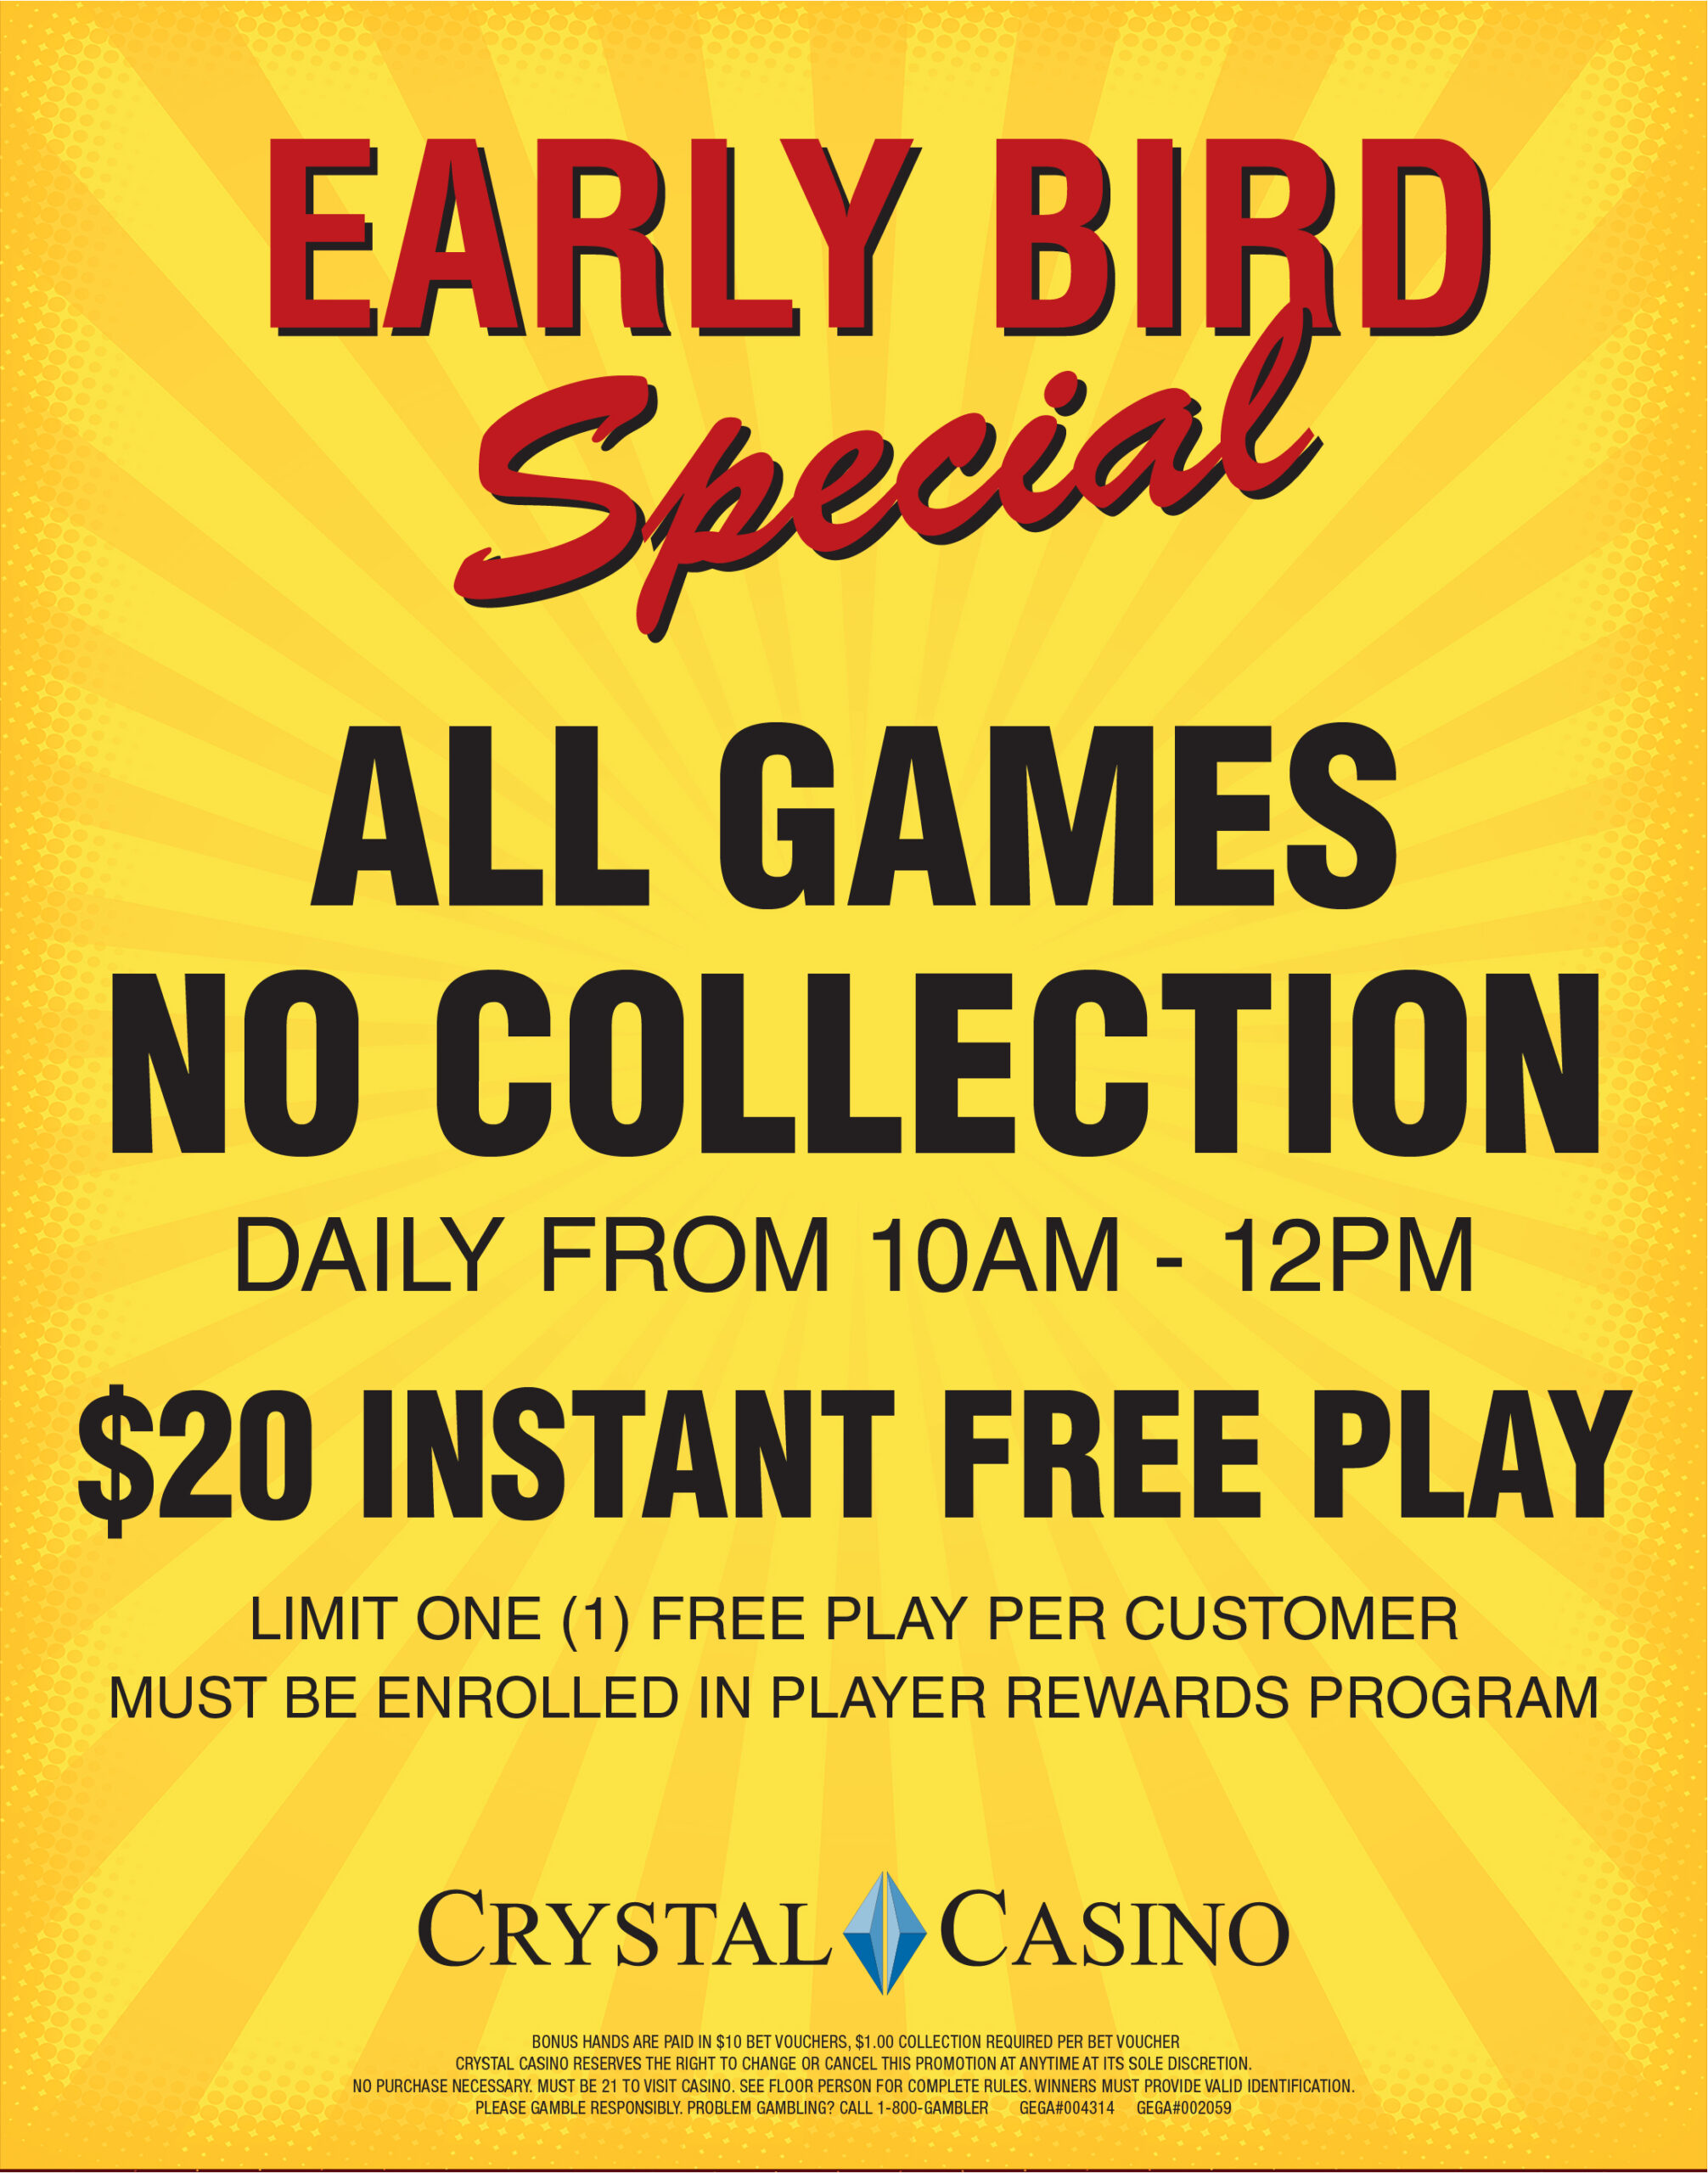 EARLY BIRD SPECIAL